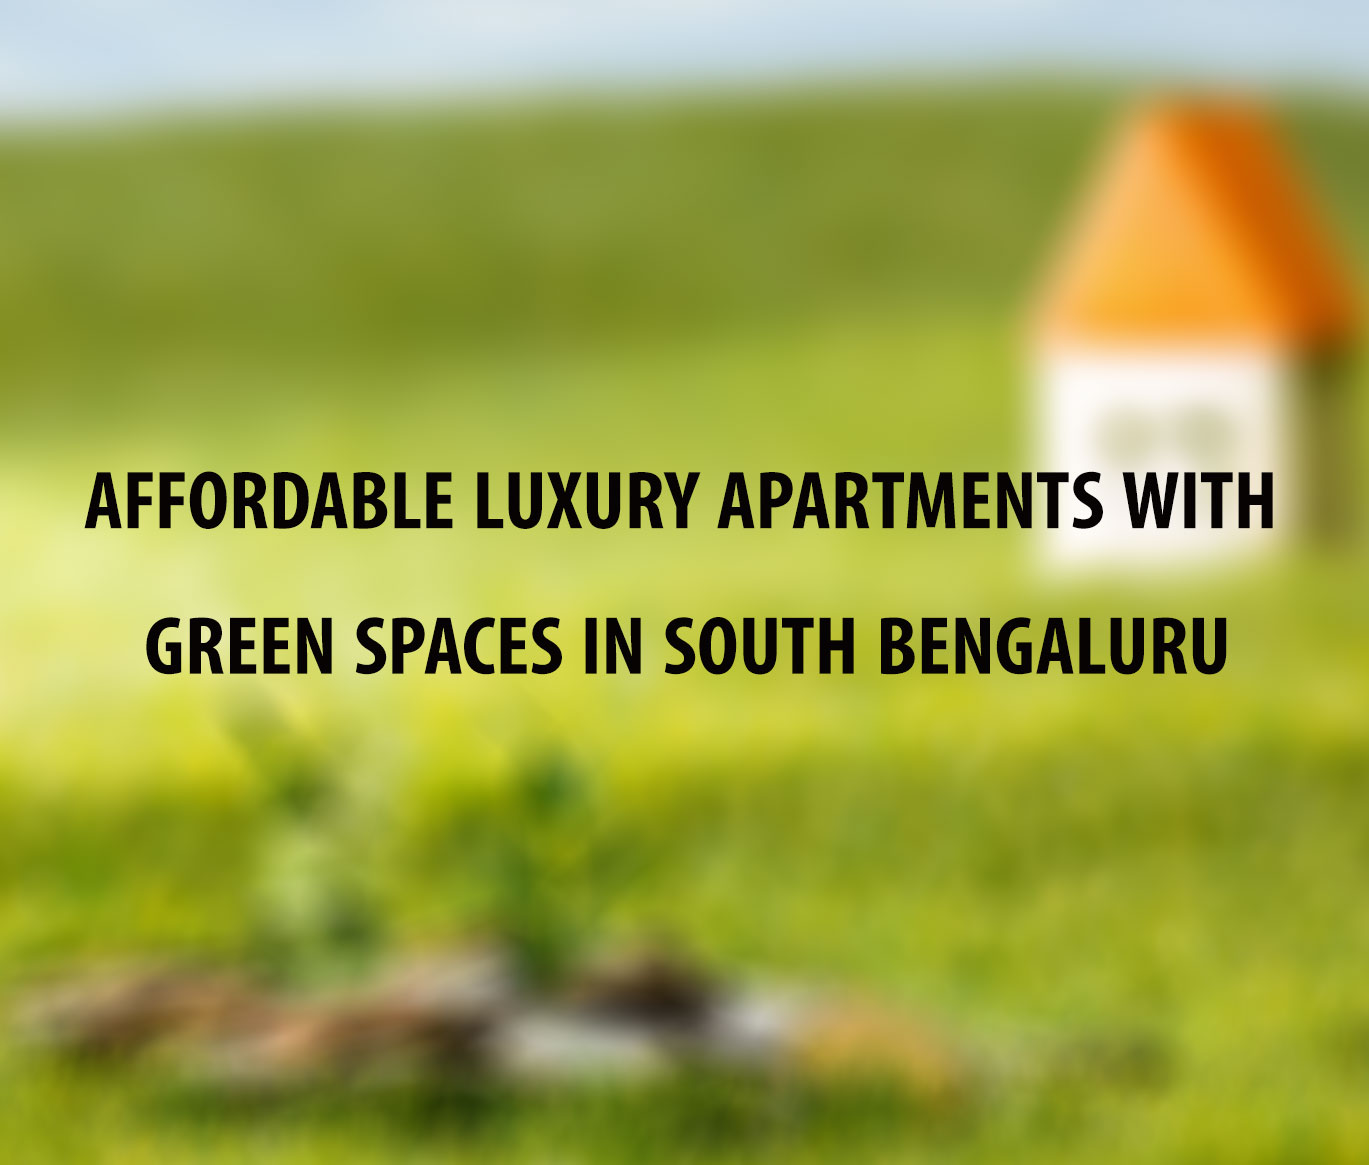 Affordable Luxury Apartments with Green Spaces in South Bengaluru